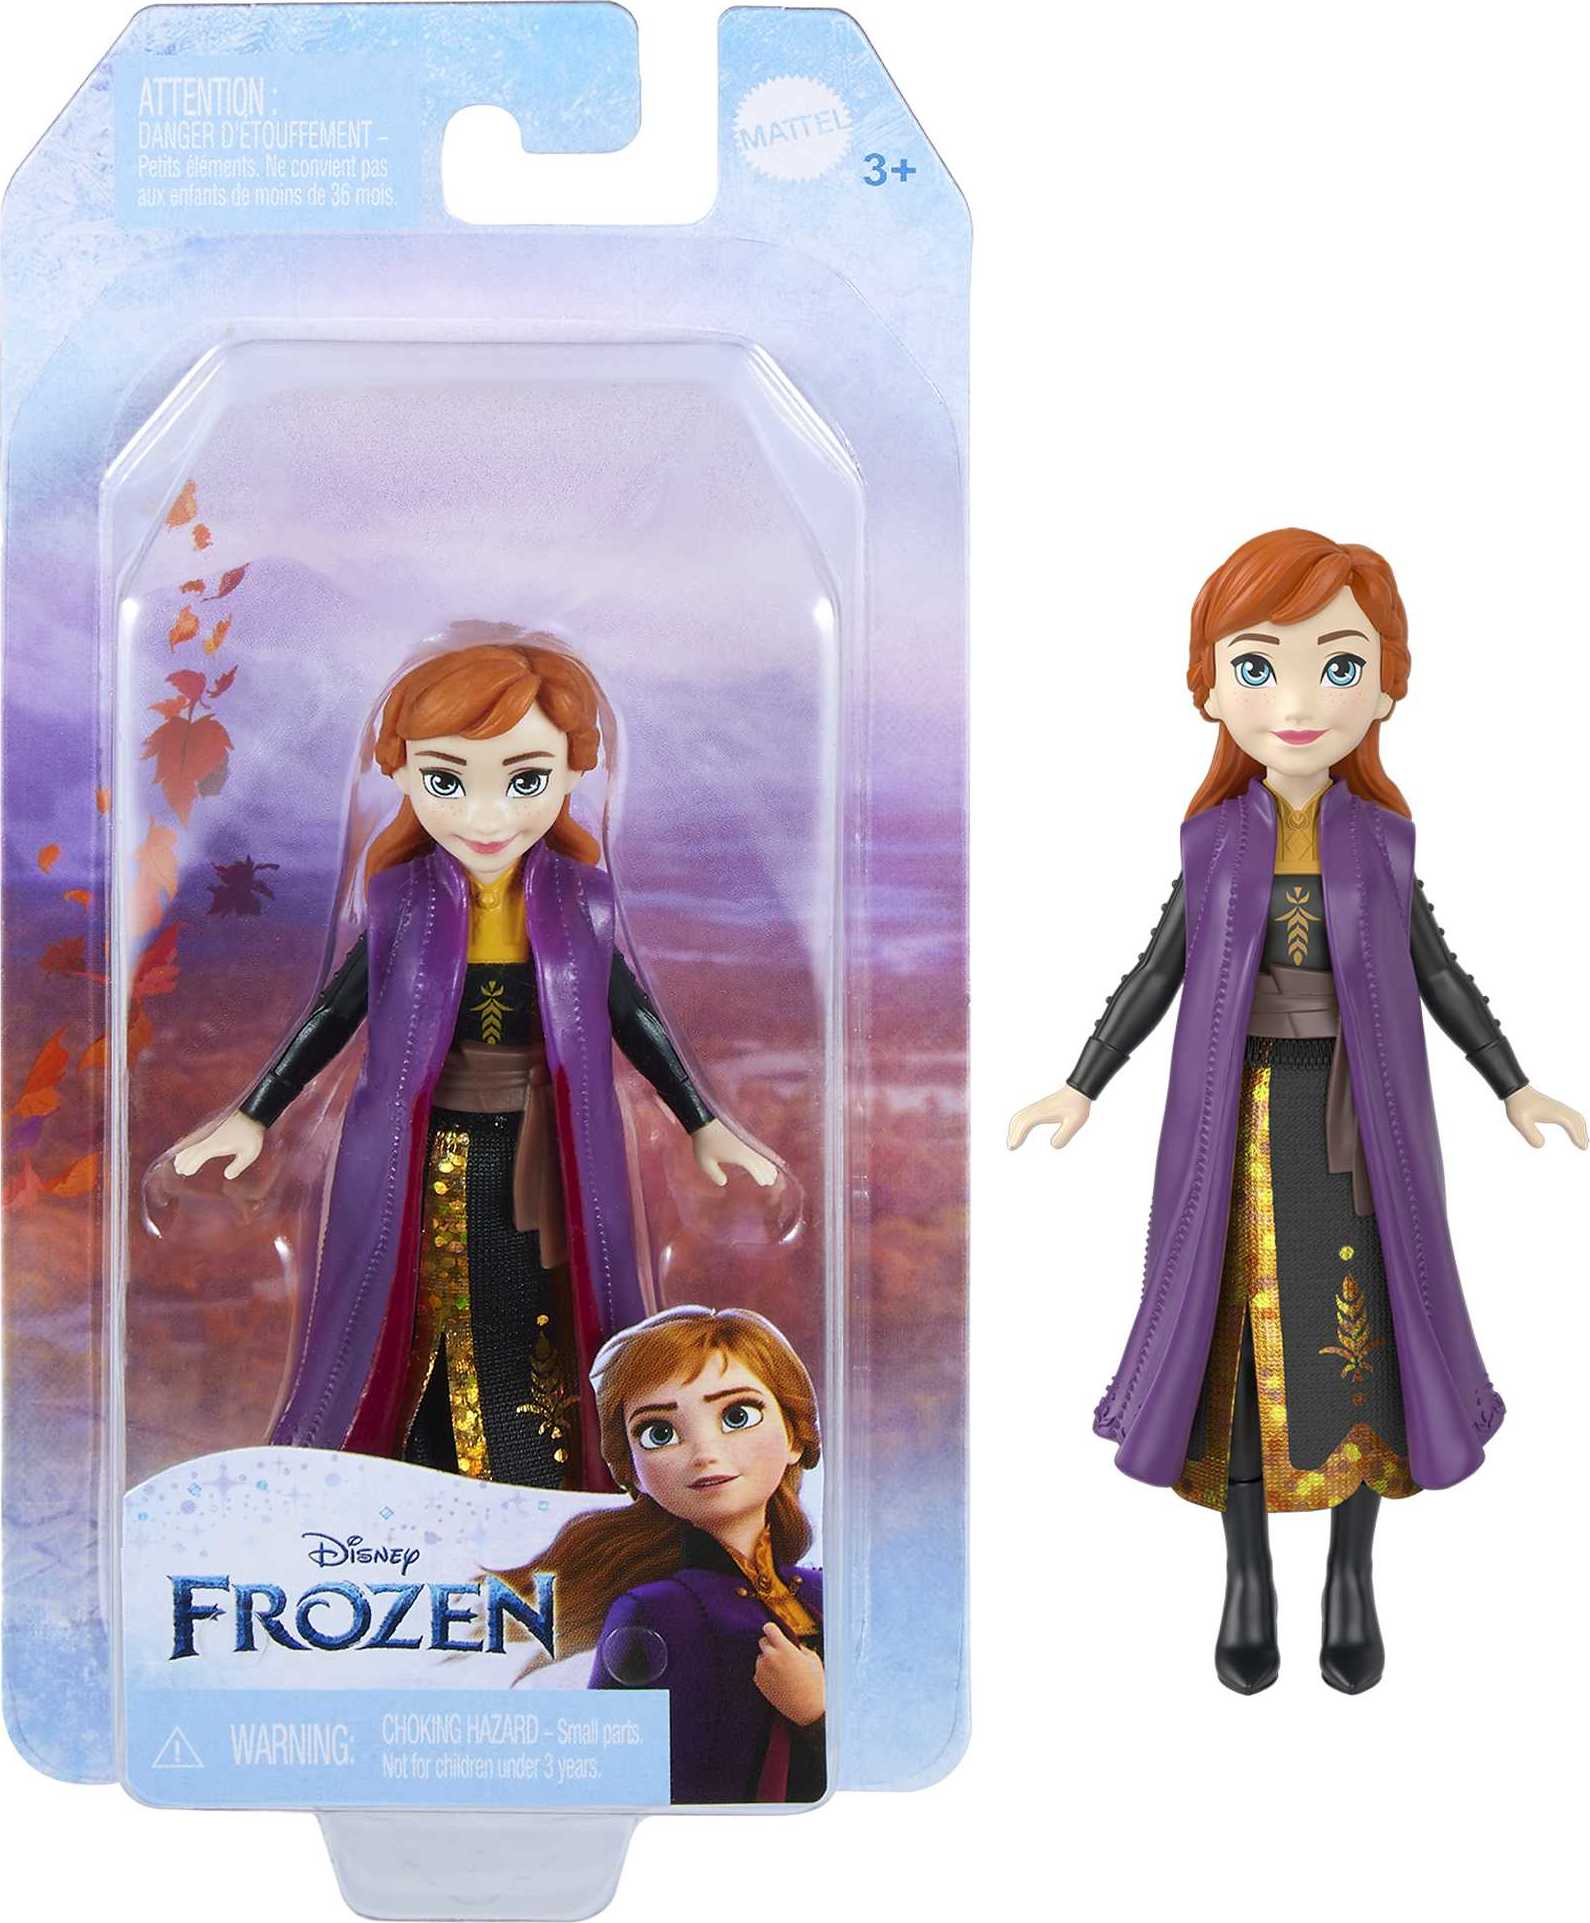 Disney Frozen Anna Small Doll in Travel Look, Posable with Removable Cape & Skirt - image 1 of 6